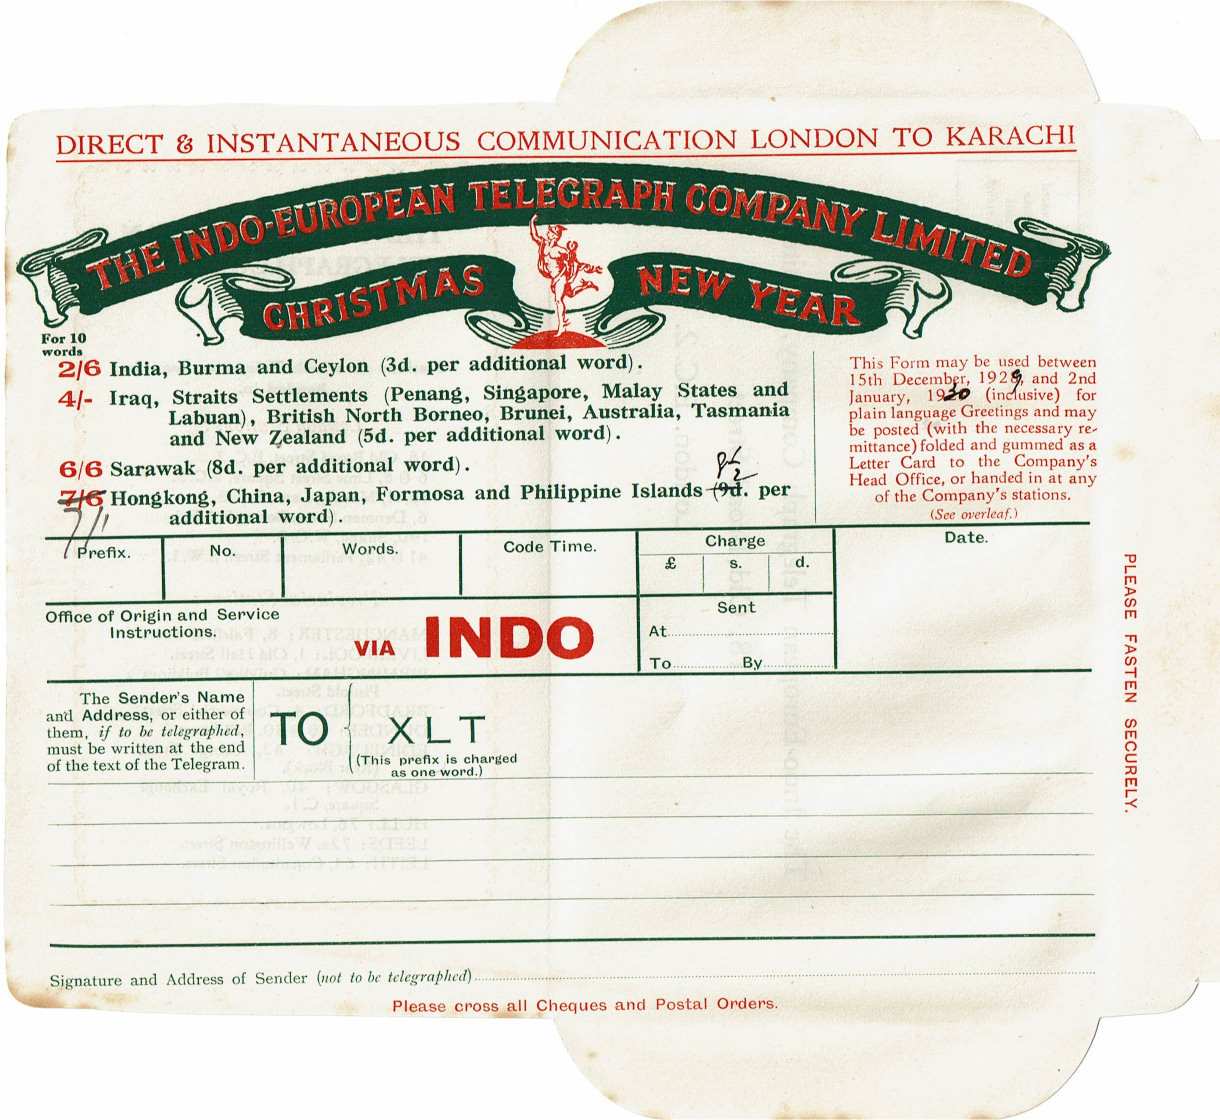 Christmas / New Year Form printed 1928 - front